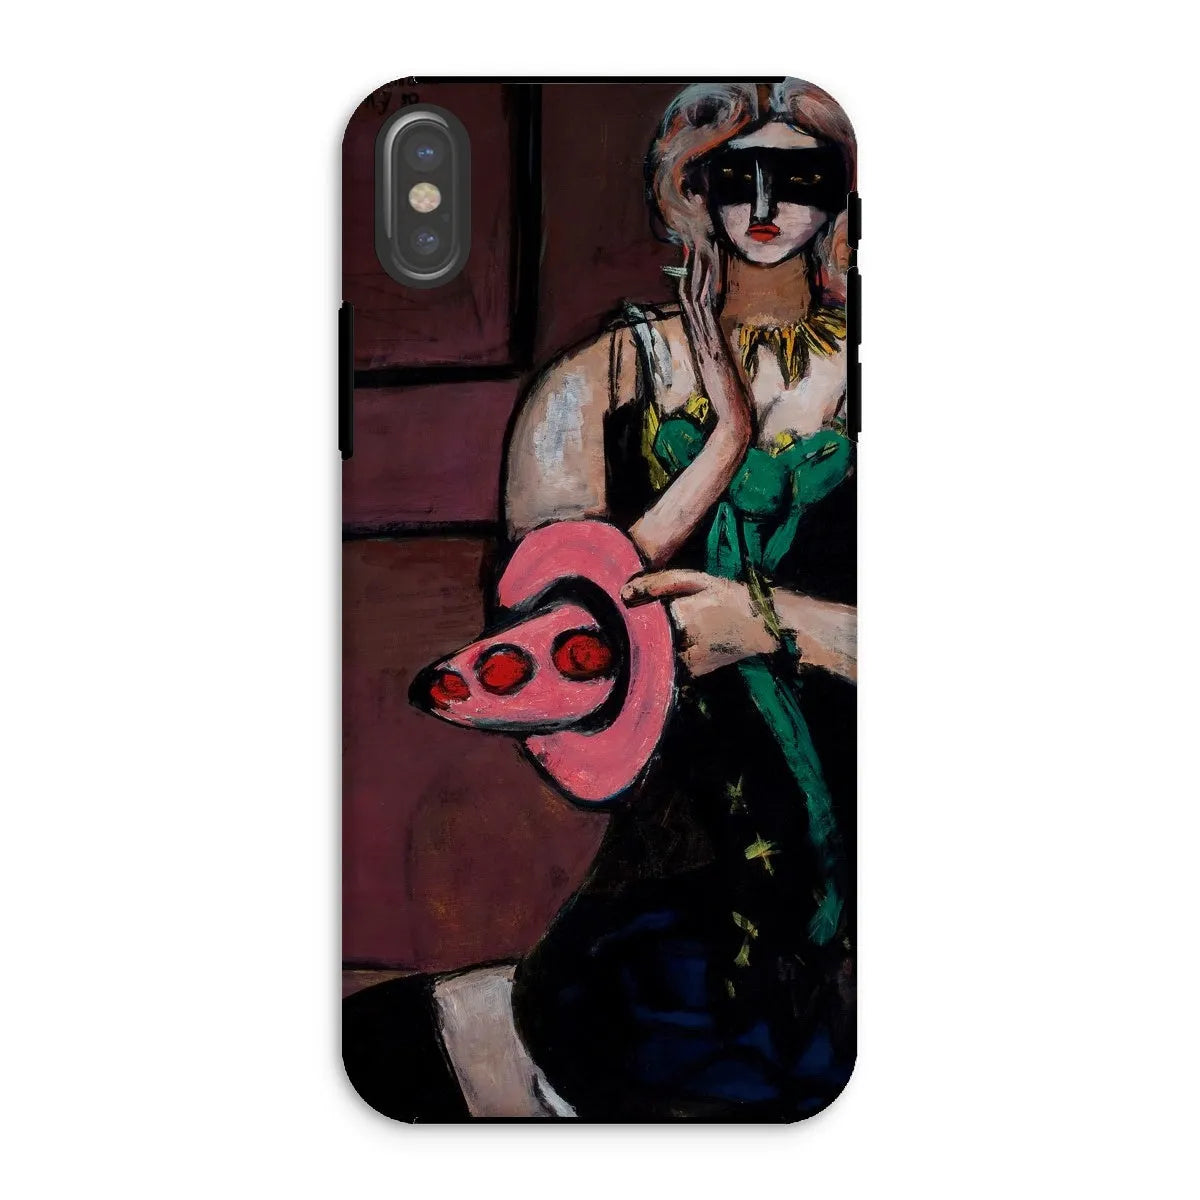 Carnival Mask - German Art Phone Case - Max Beckmann - Iphone Xs / Matte - Mobile Phone Cases - Aesthetic Art